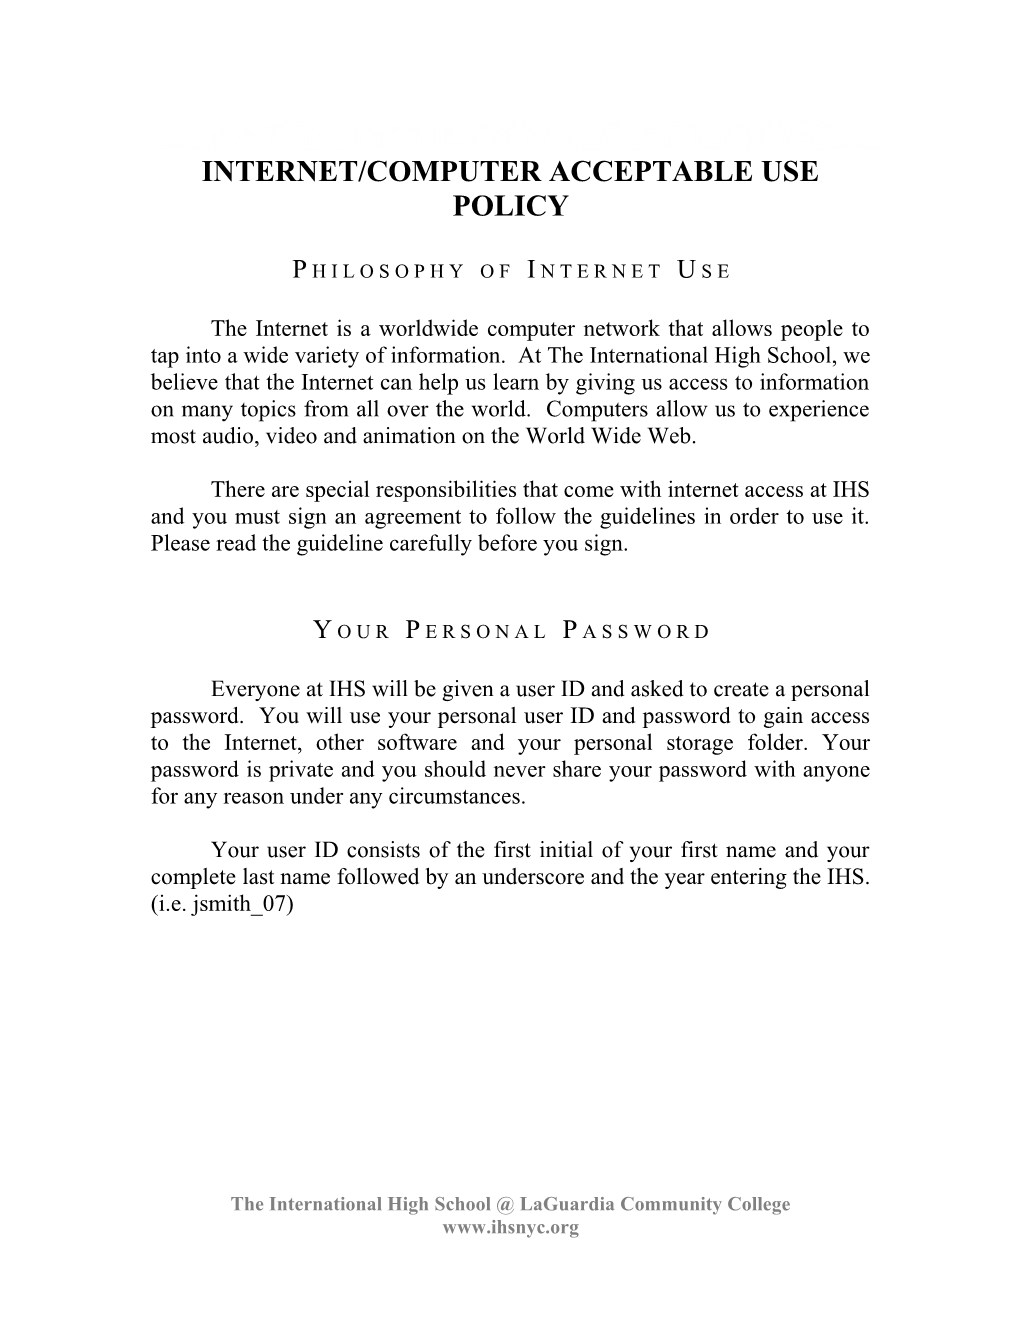 Internet/Computer Acceptable Use Policy